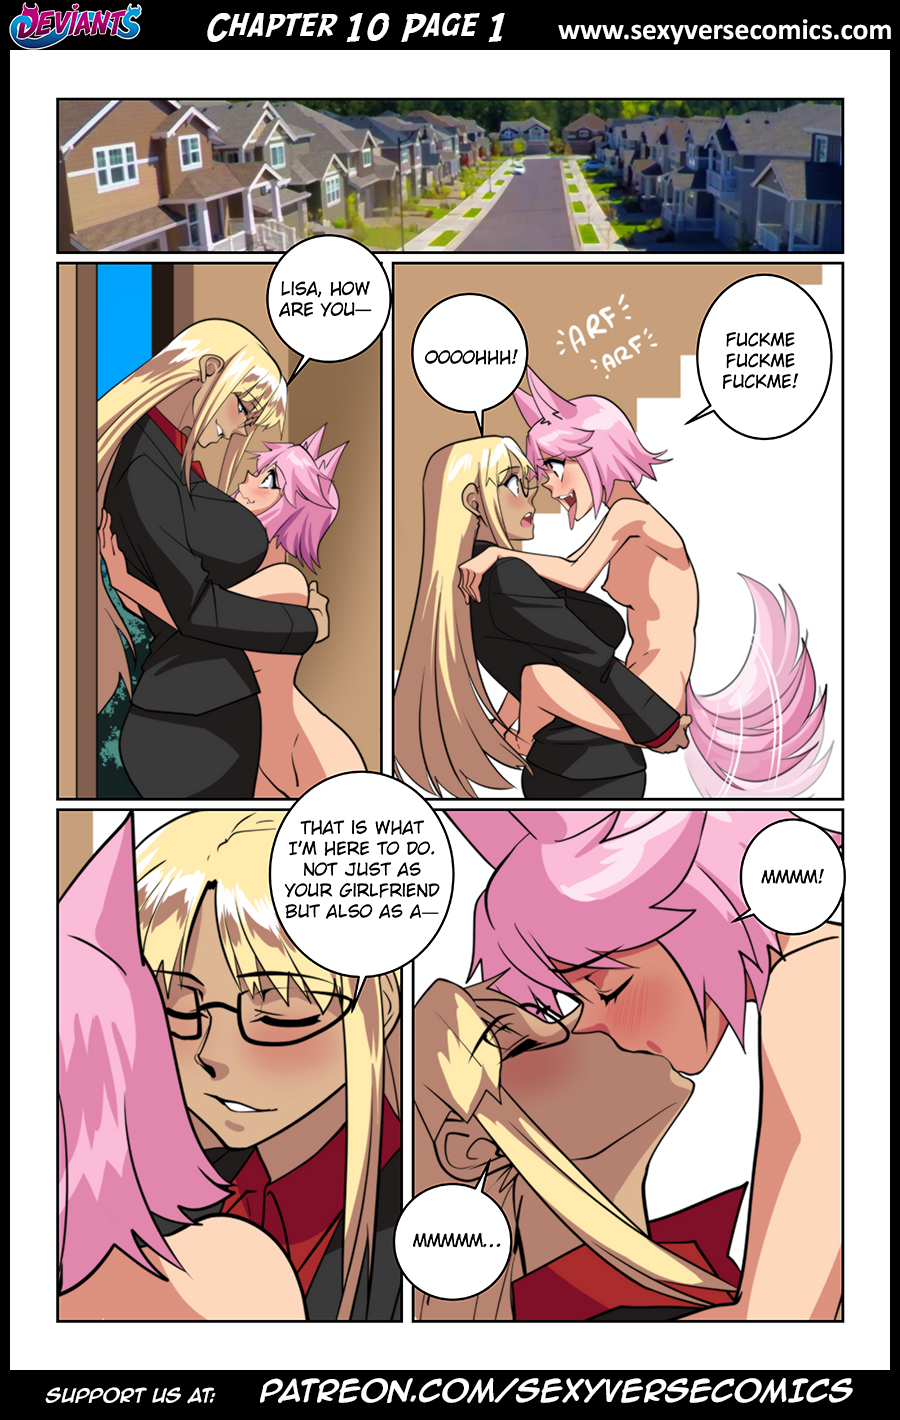 Deviants Chapter 10 Page 1